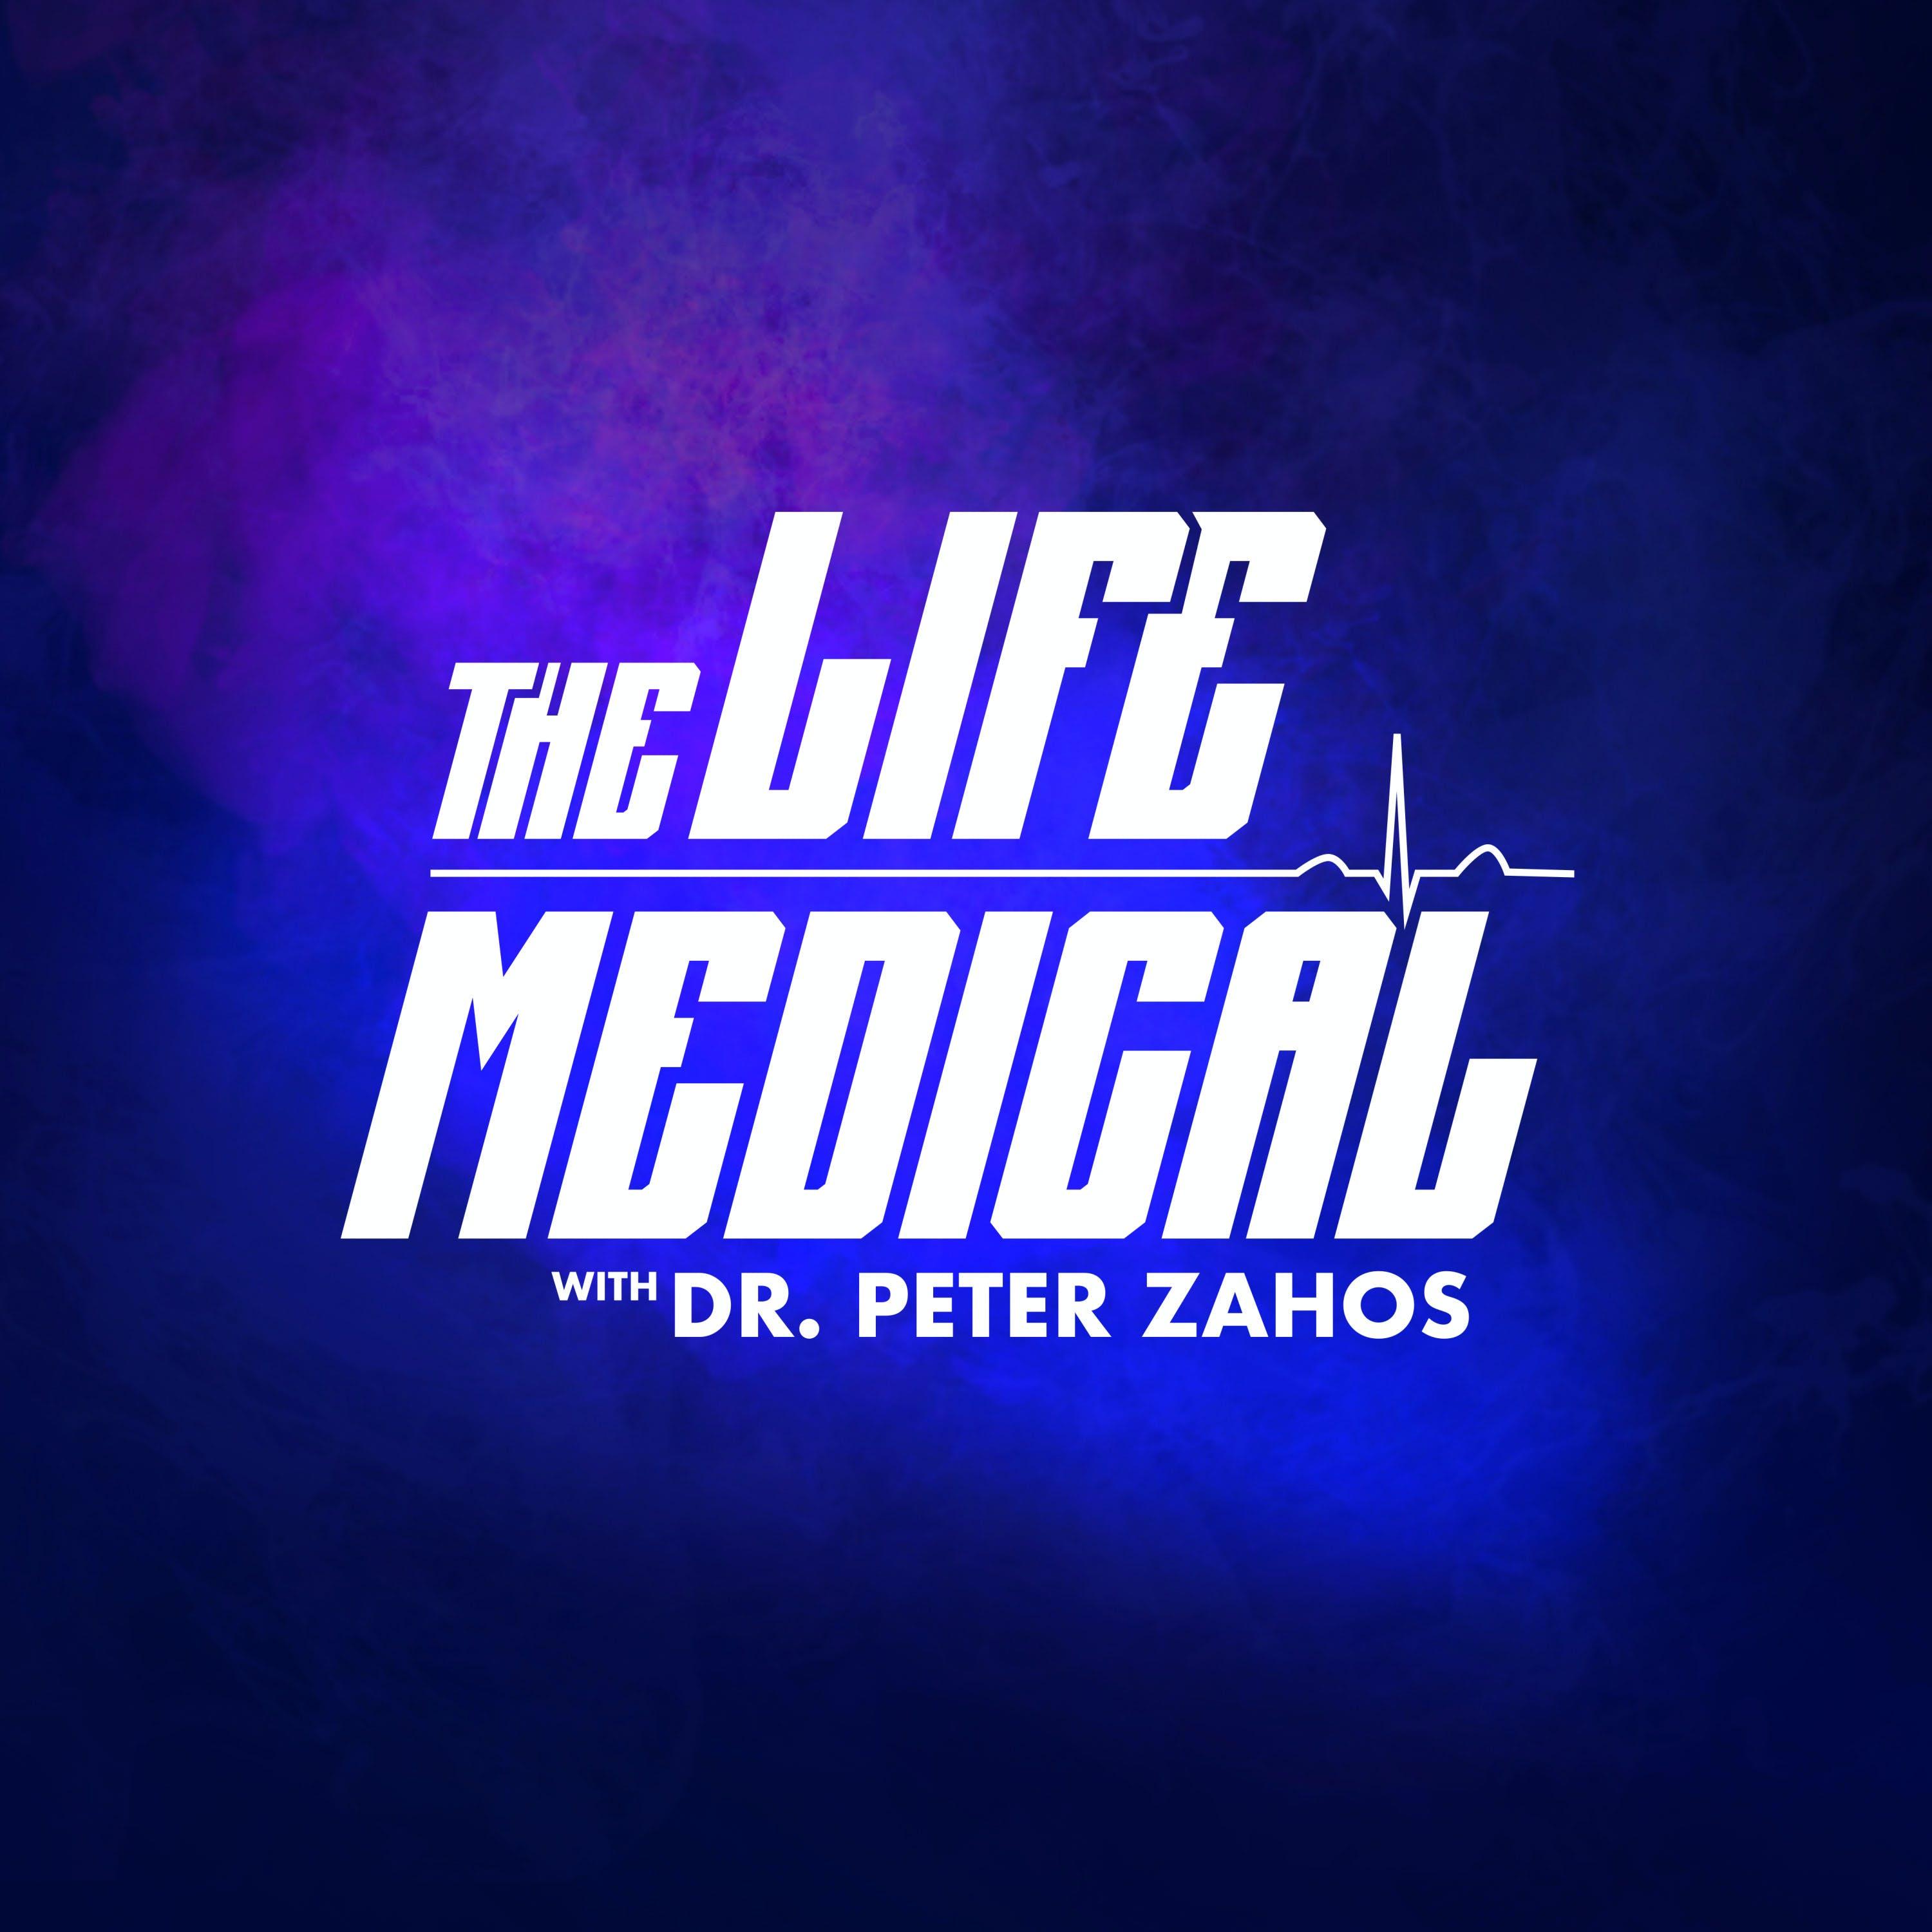 Show poster of The Life Medical